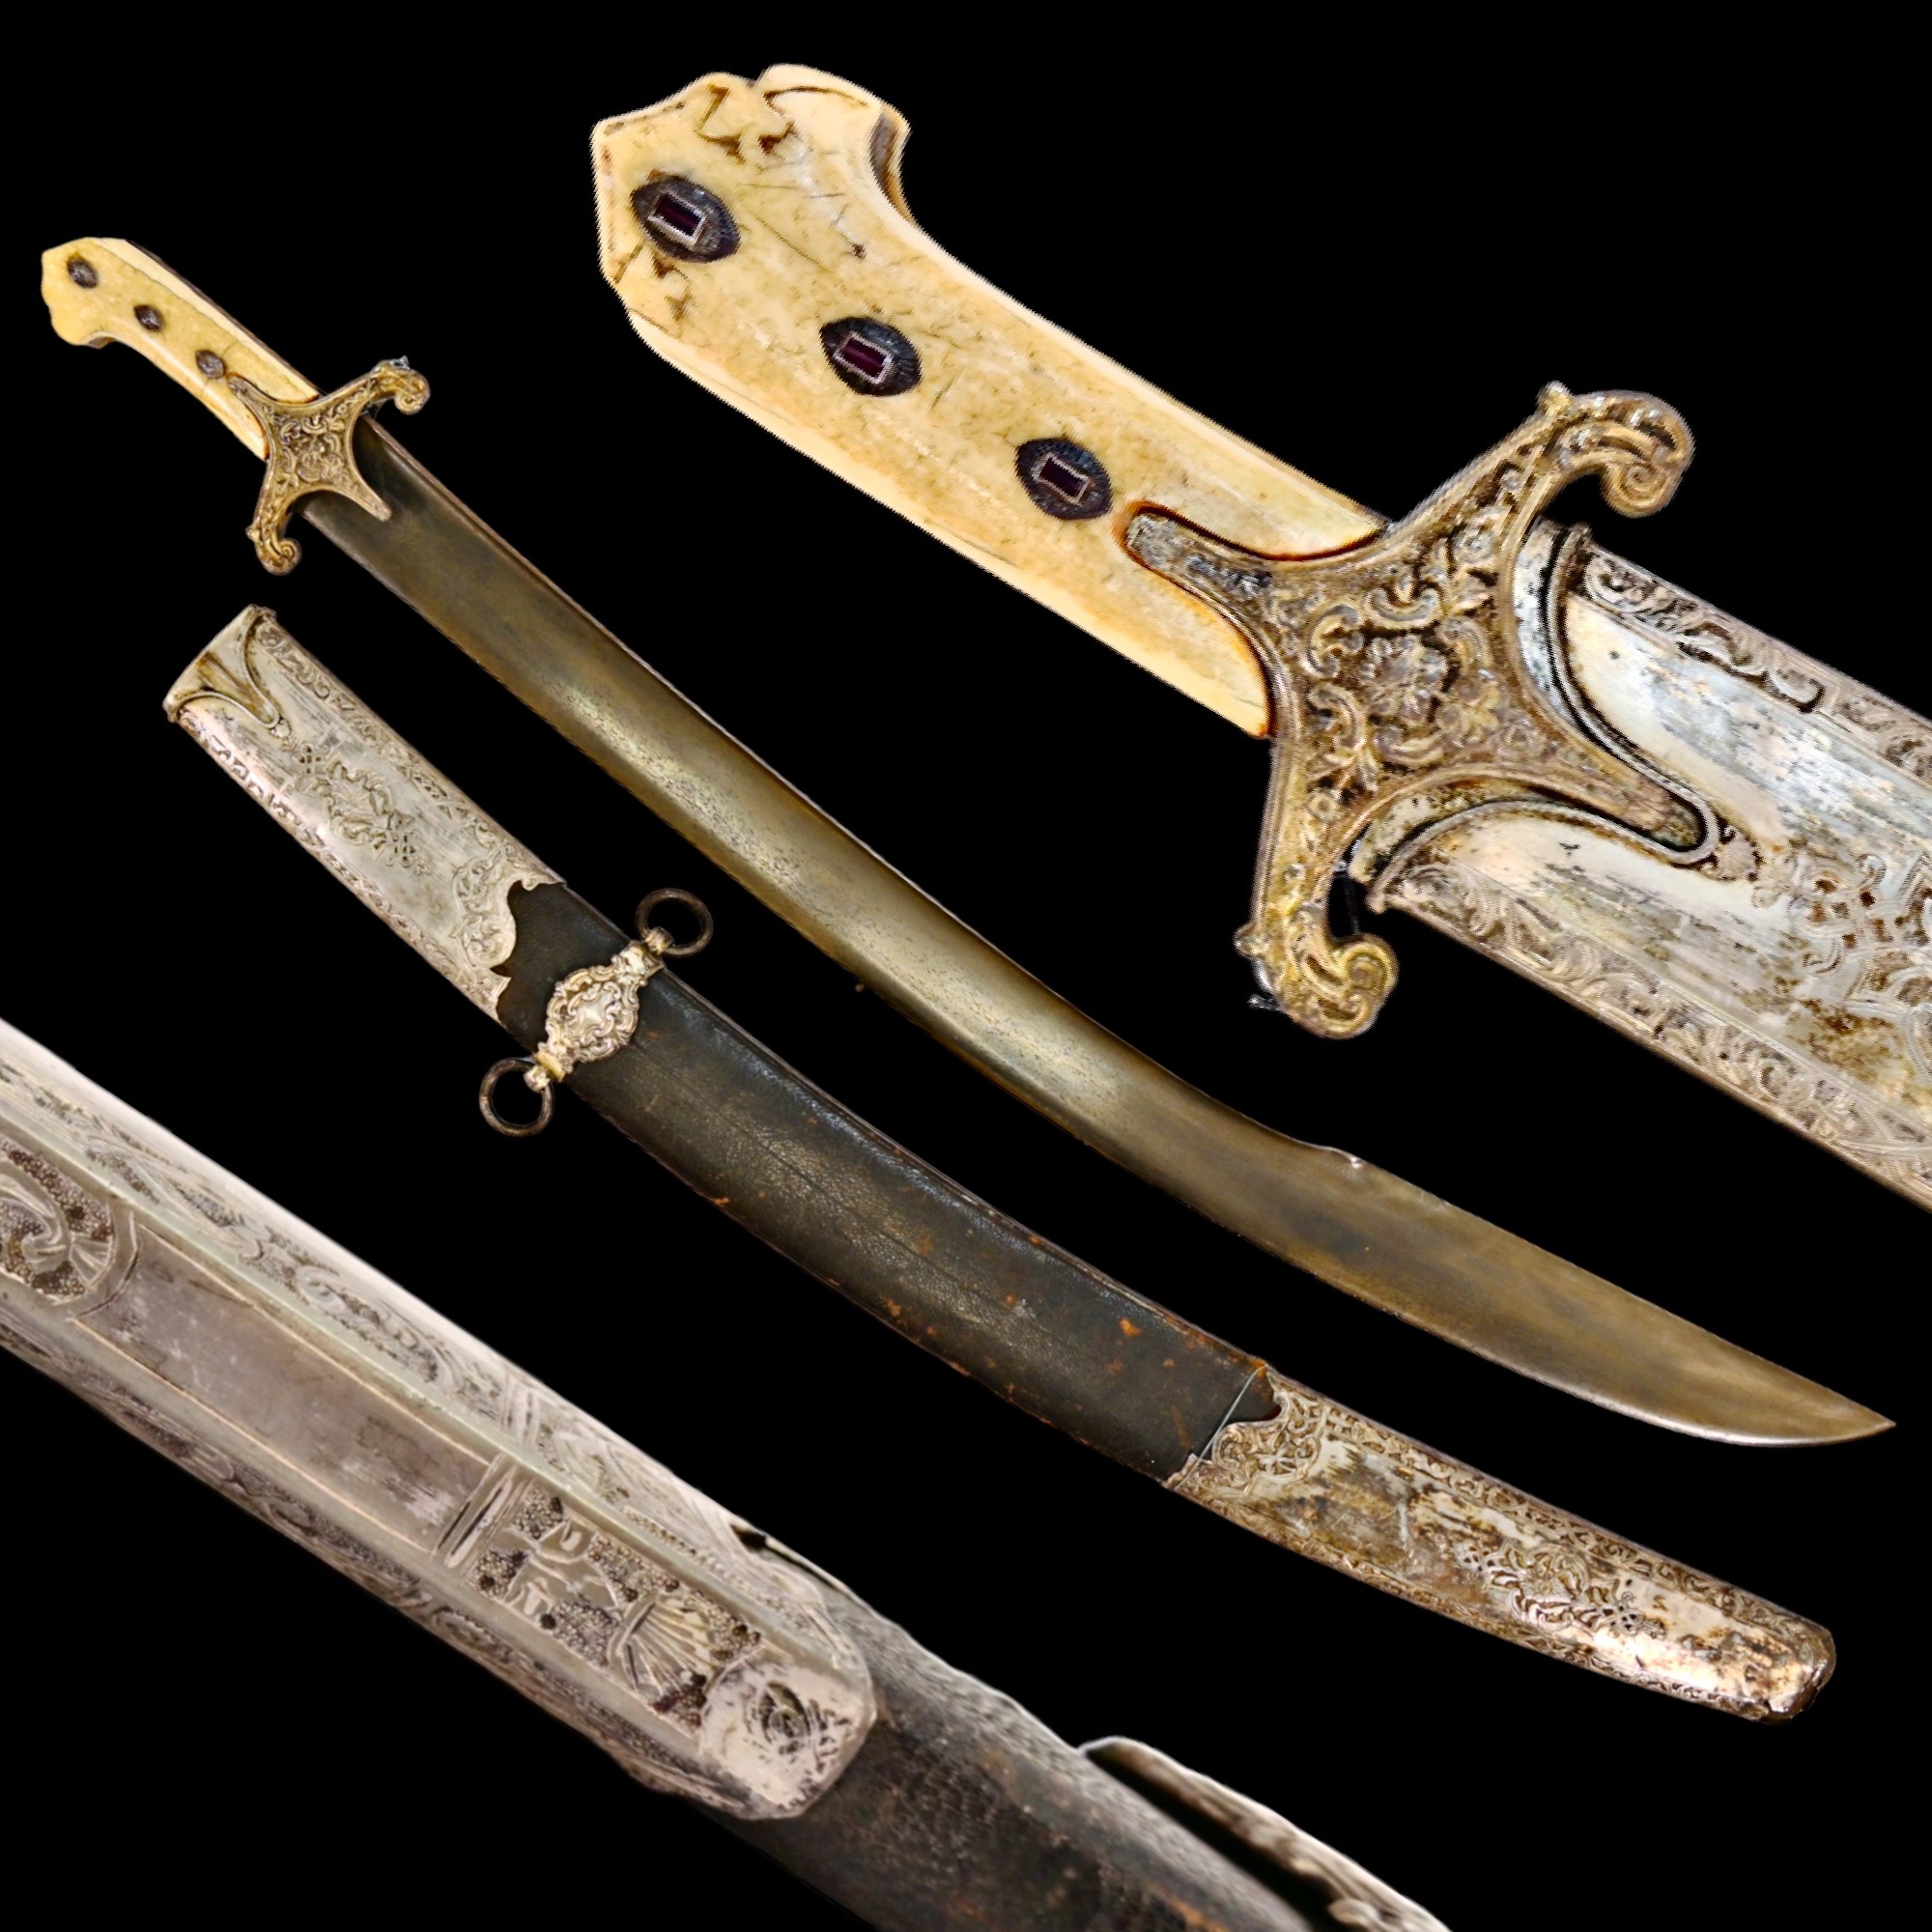 Rare Ottoman saber KARABELA, wootz blade, silver with the tugra of Sultan Ahmed III, early 18th C.